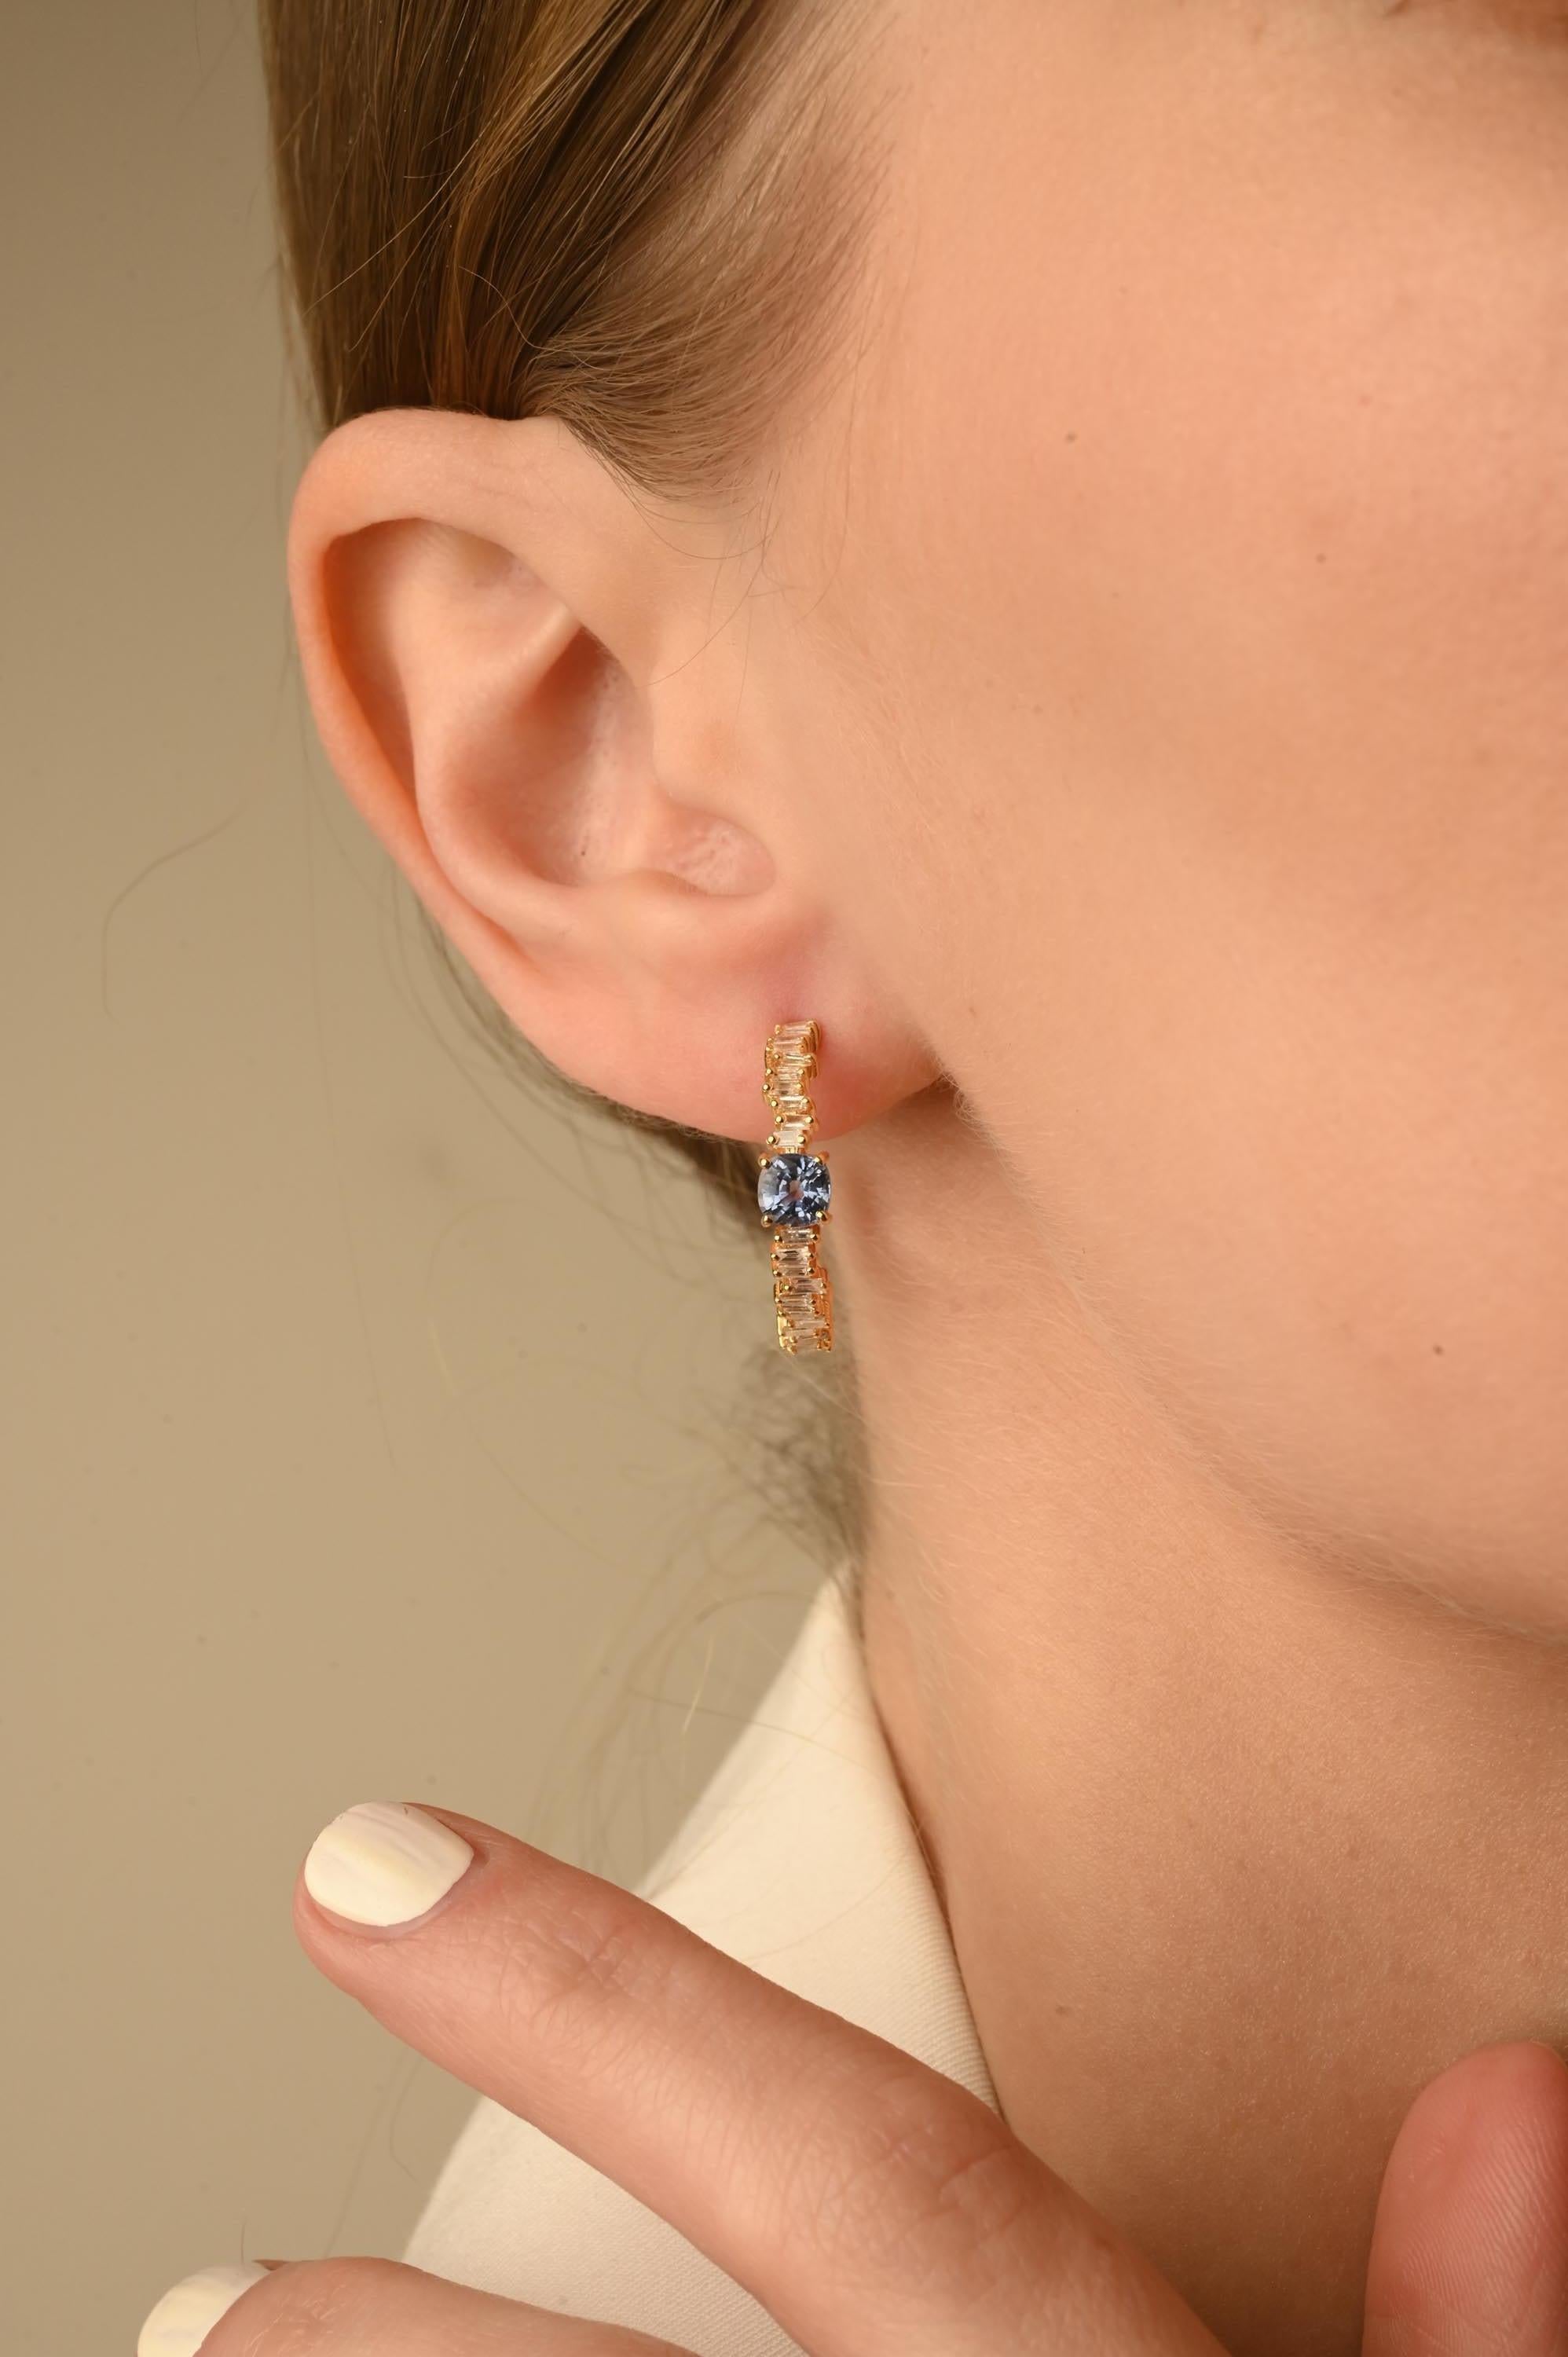 Blue Sapphire Hoop Earrings in 14K Gold with Diamonds to make a statement with your look. You shall need open hoop earrings to make a statement with your look. These earrings create a sparkling, luxurious look featuring cushion cut